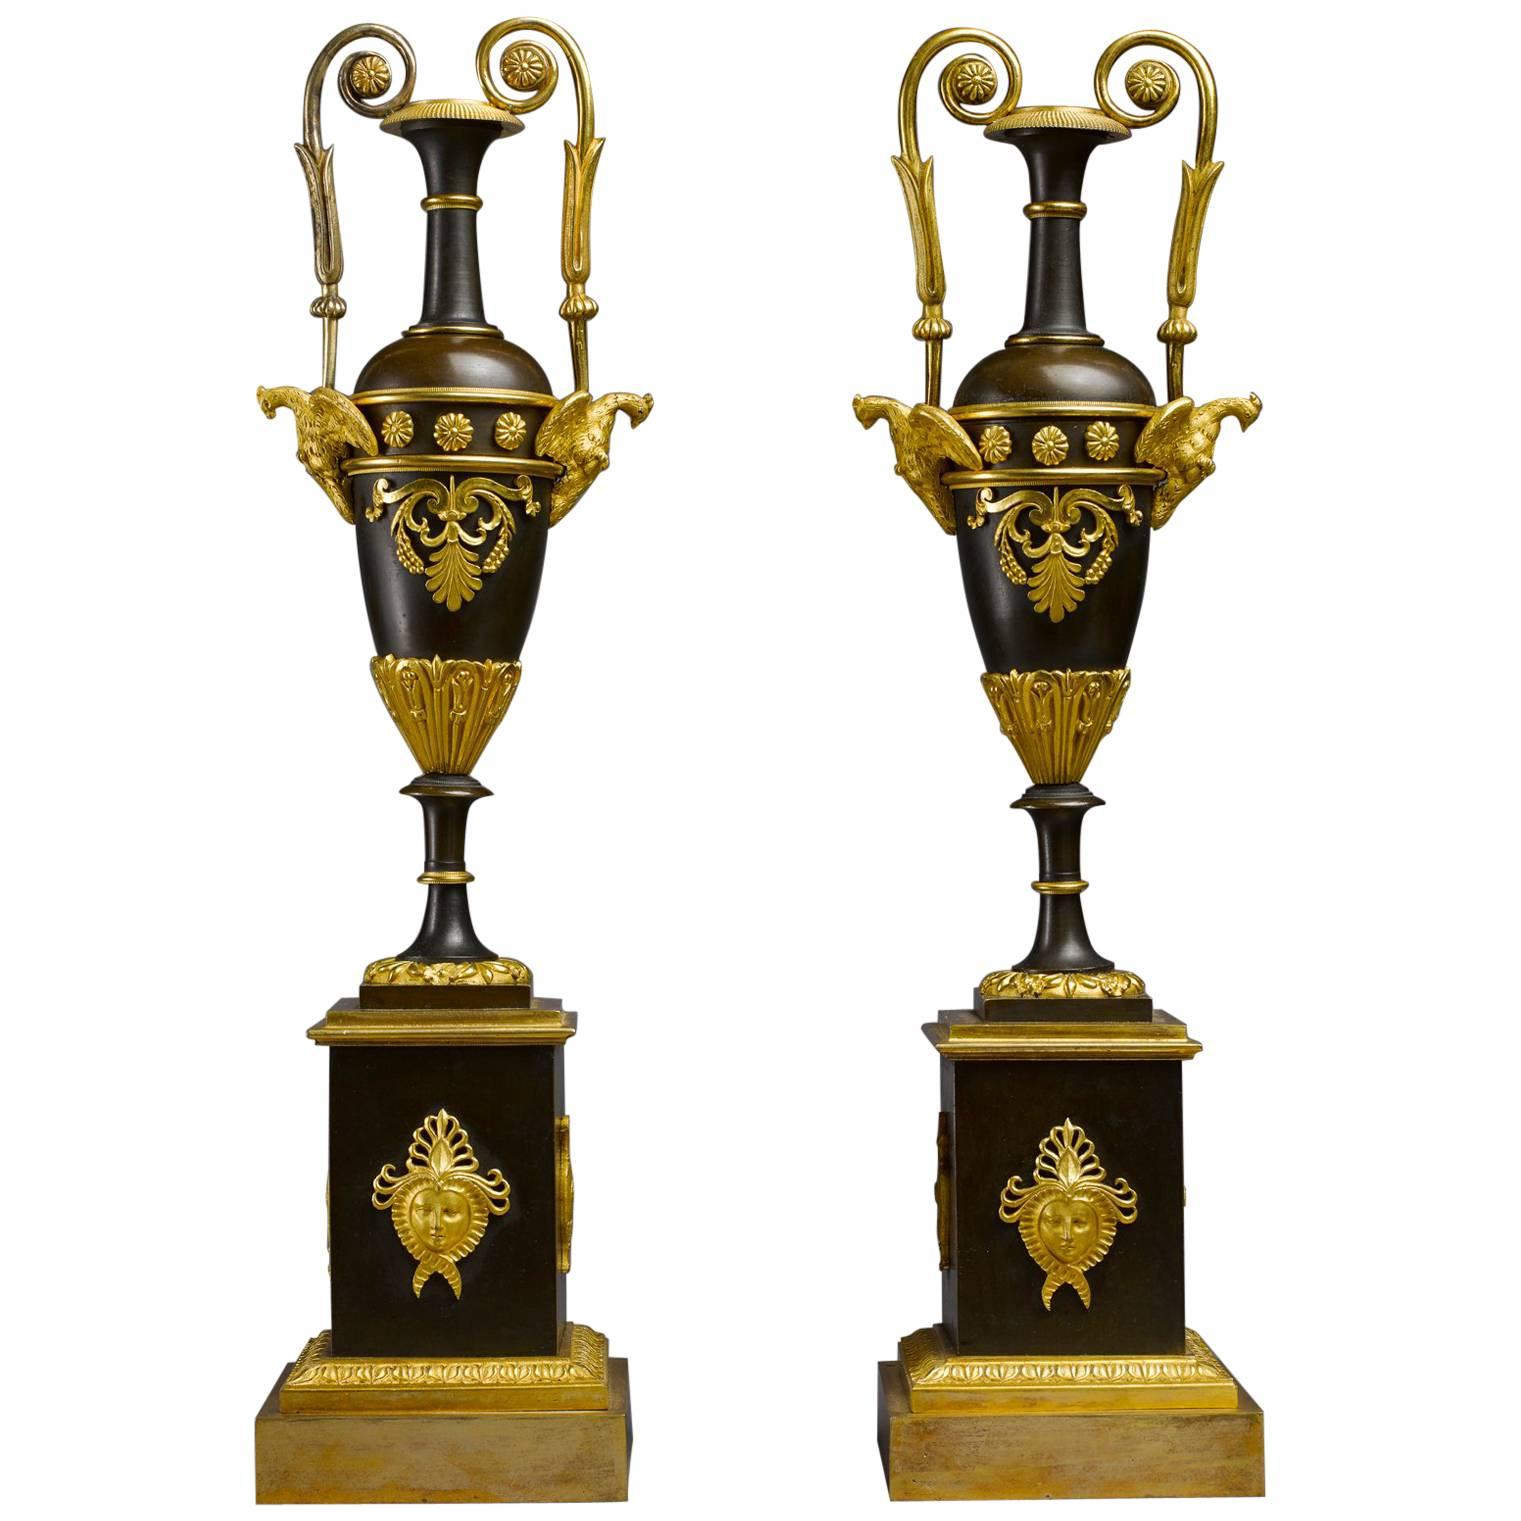 Pair of Early 19th Century, French Empire Ormolu Vases Attributed Thomire Galle